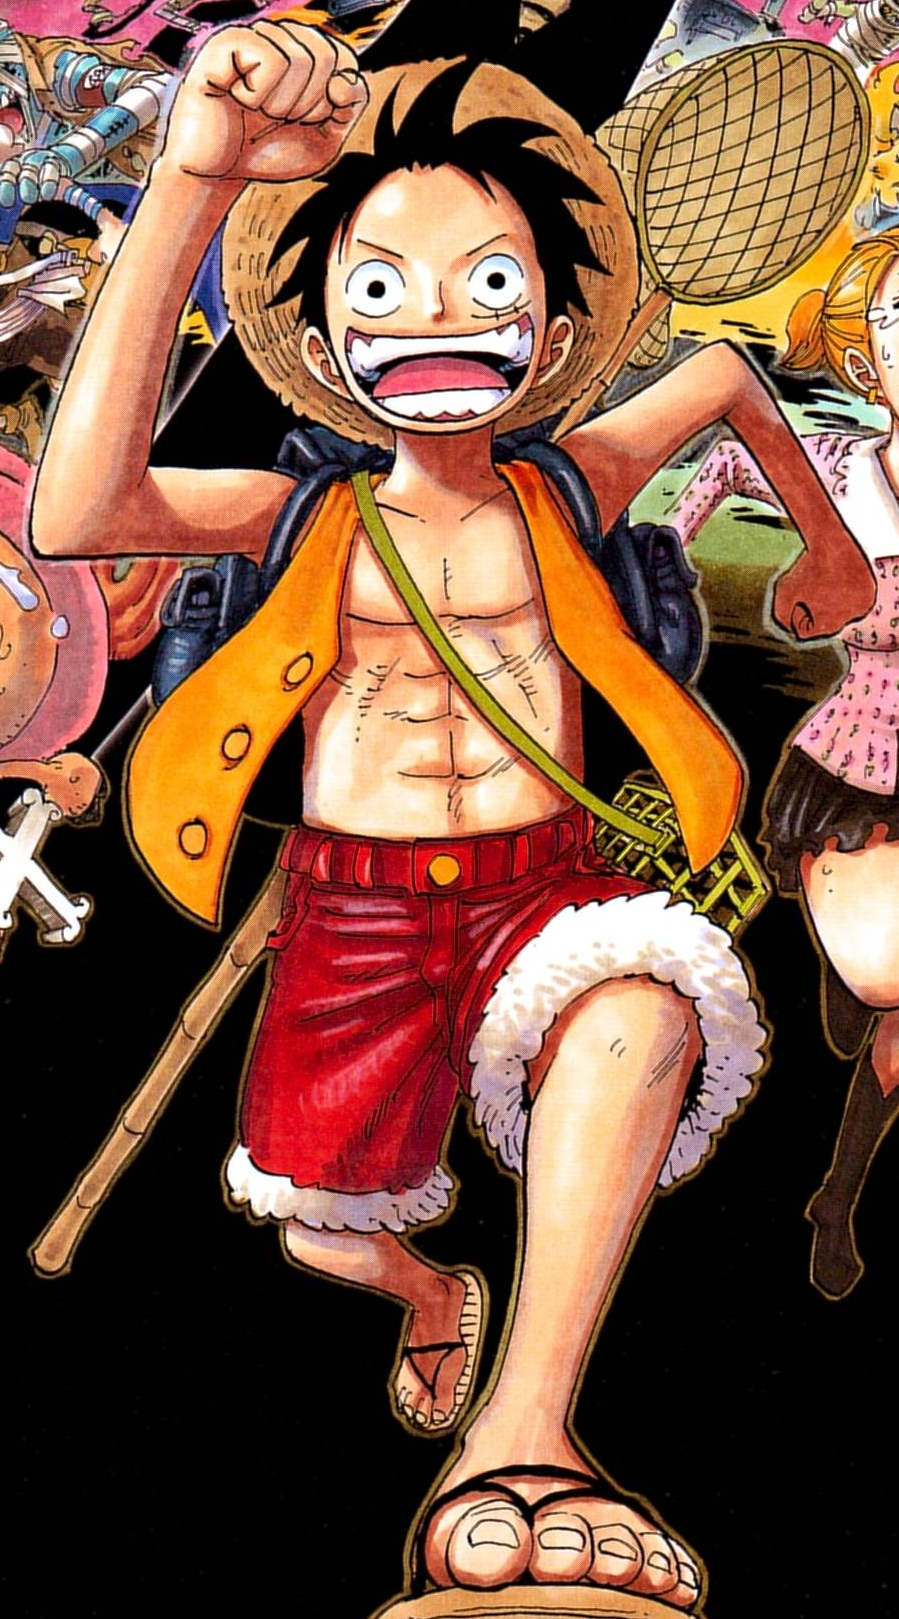 http://images4.wikia.nocookie.net/__cb20130526082626/onepiece/fr/images/d/de/Luffy_Thriller_Bark.png